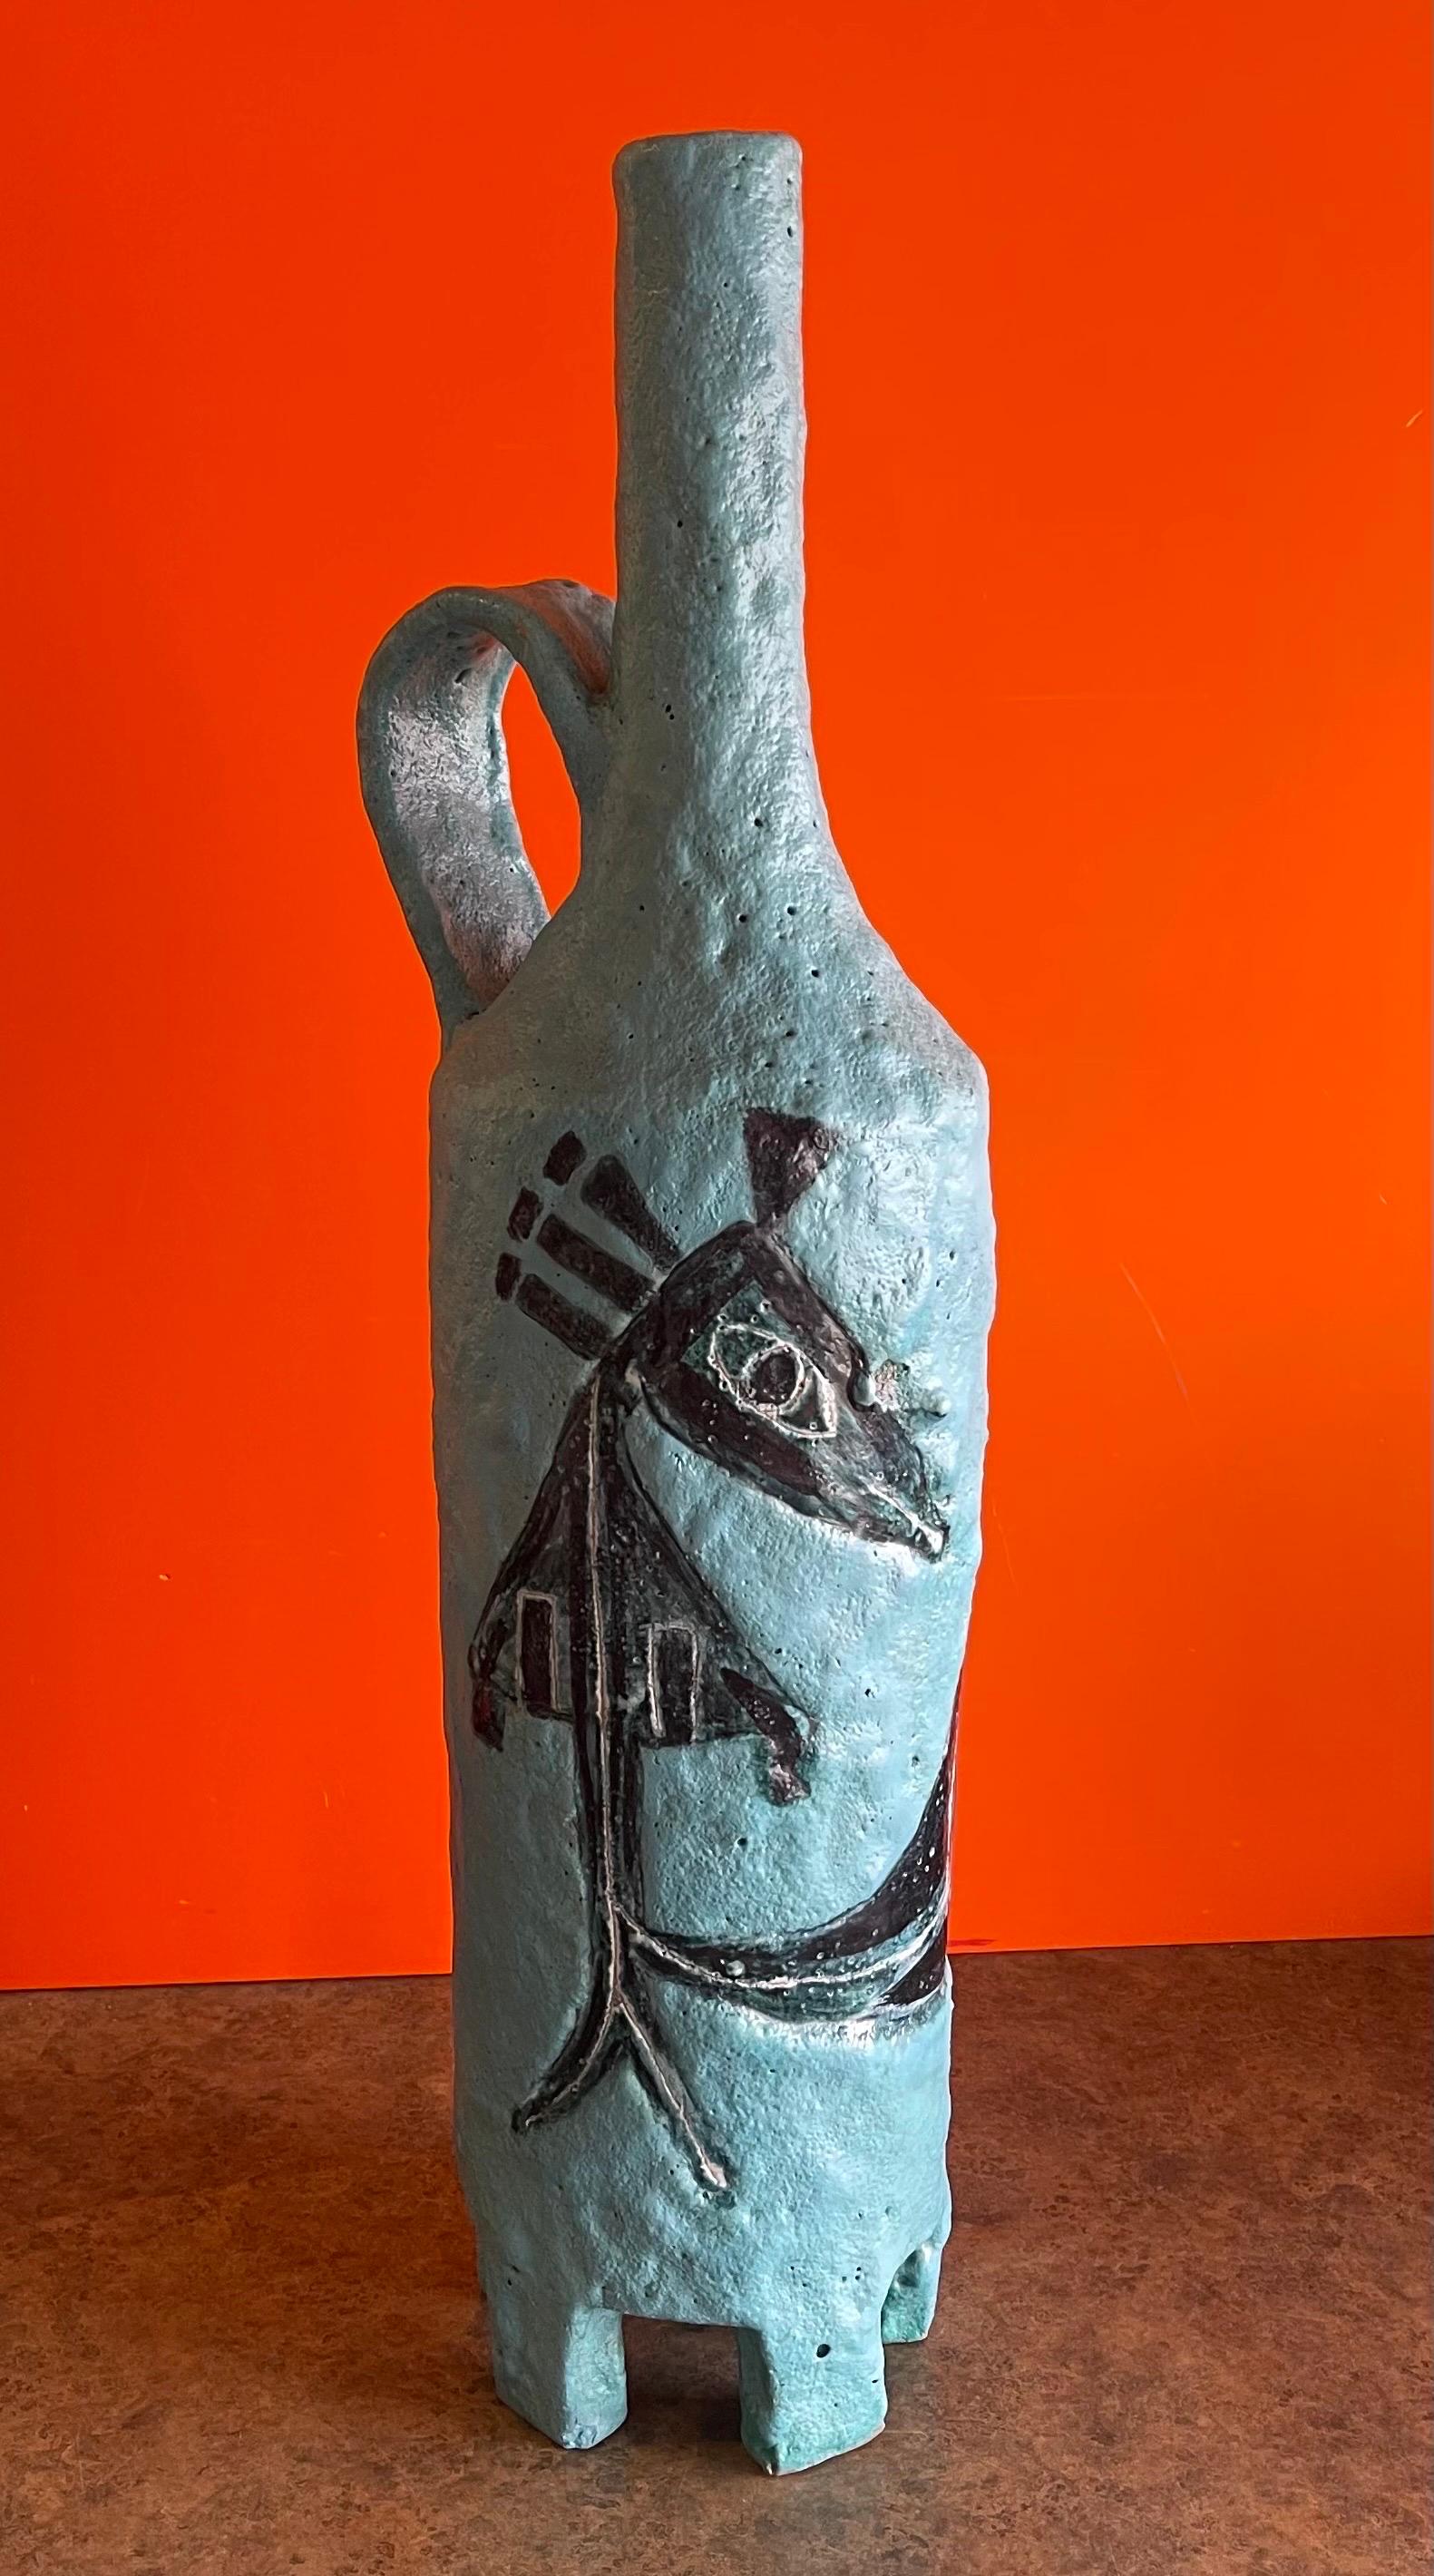 Massive Handled Jug / Vase by Aldo Londo for Bitossi Raymor In Good Condition For Sale In San Diego, CA